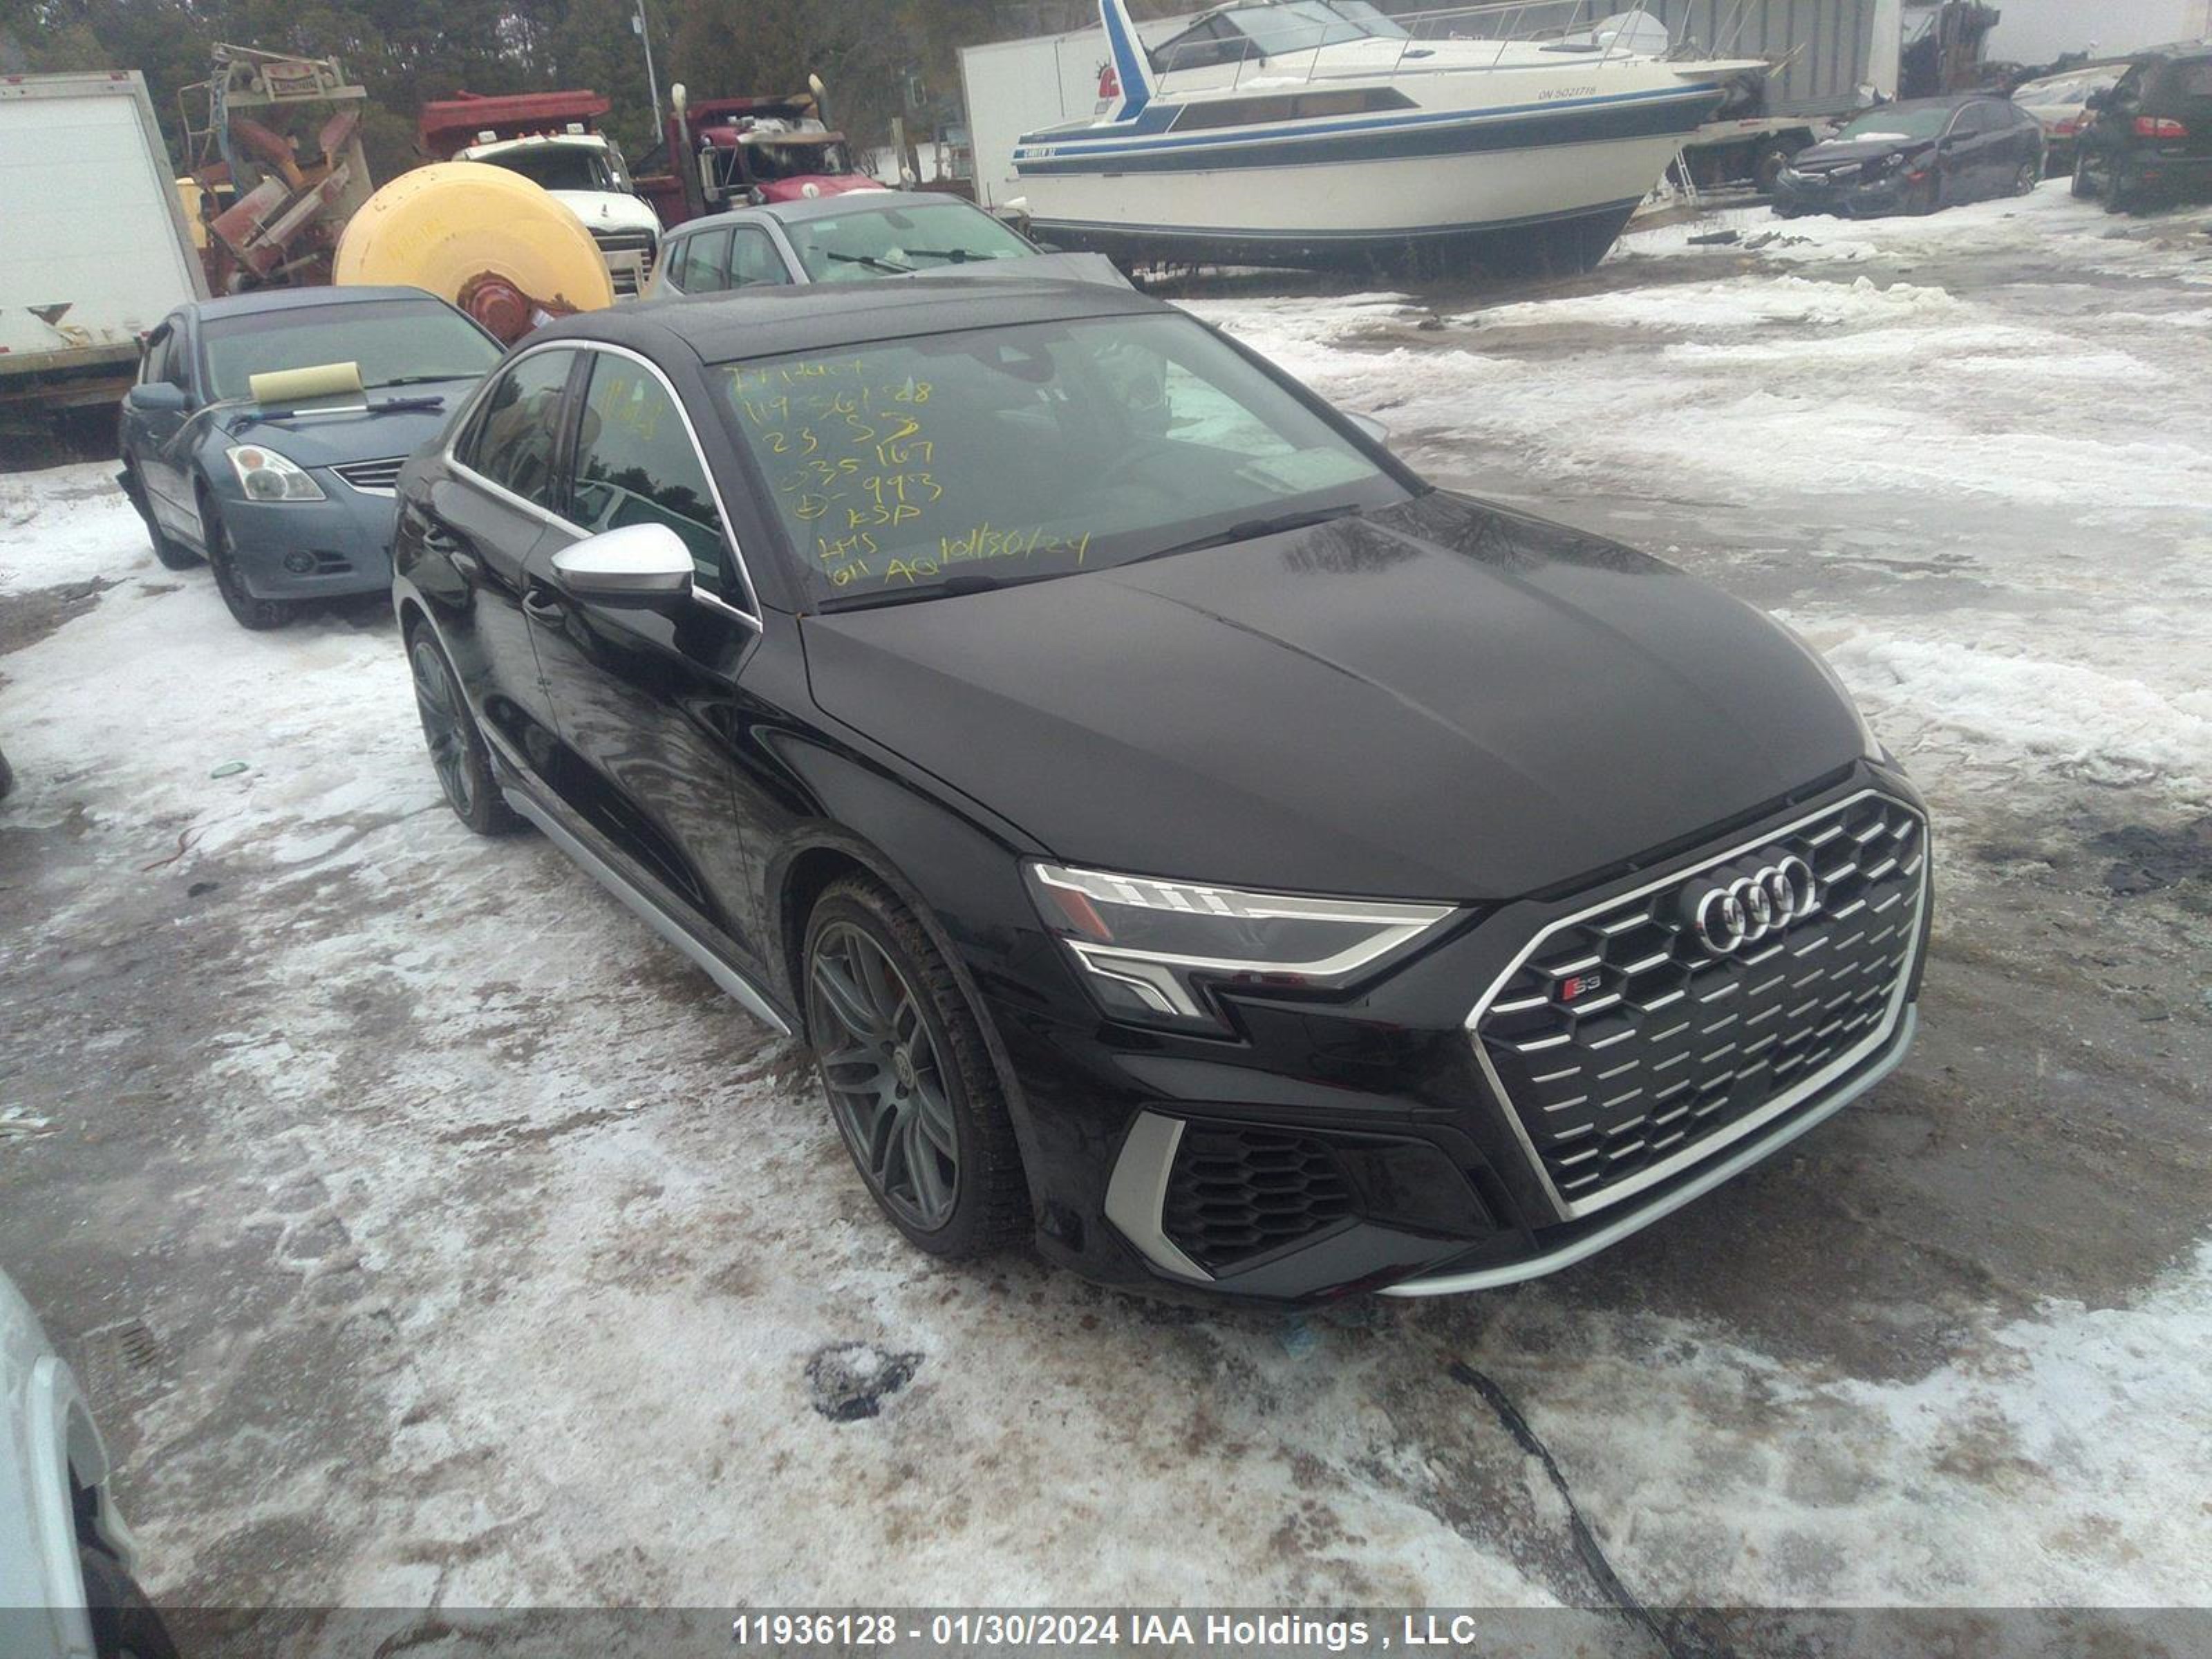 vin: WAUG3CGY5PA035167 WAUG3CGY5PA035167 2023 audi s3 2000 for Sale in l4a7x4, 16505 Hwy 48 , Stouffville, Ontario, USA